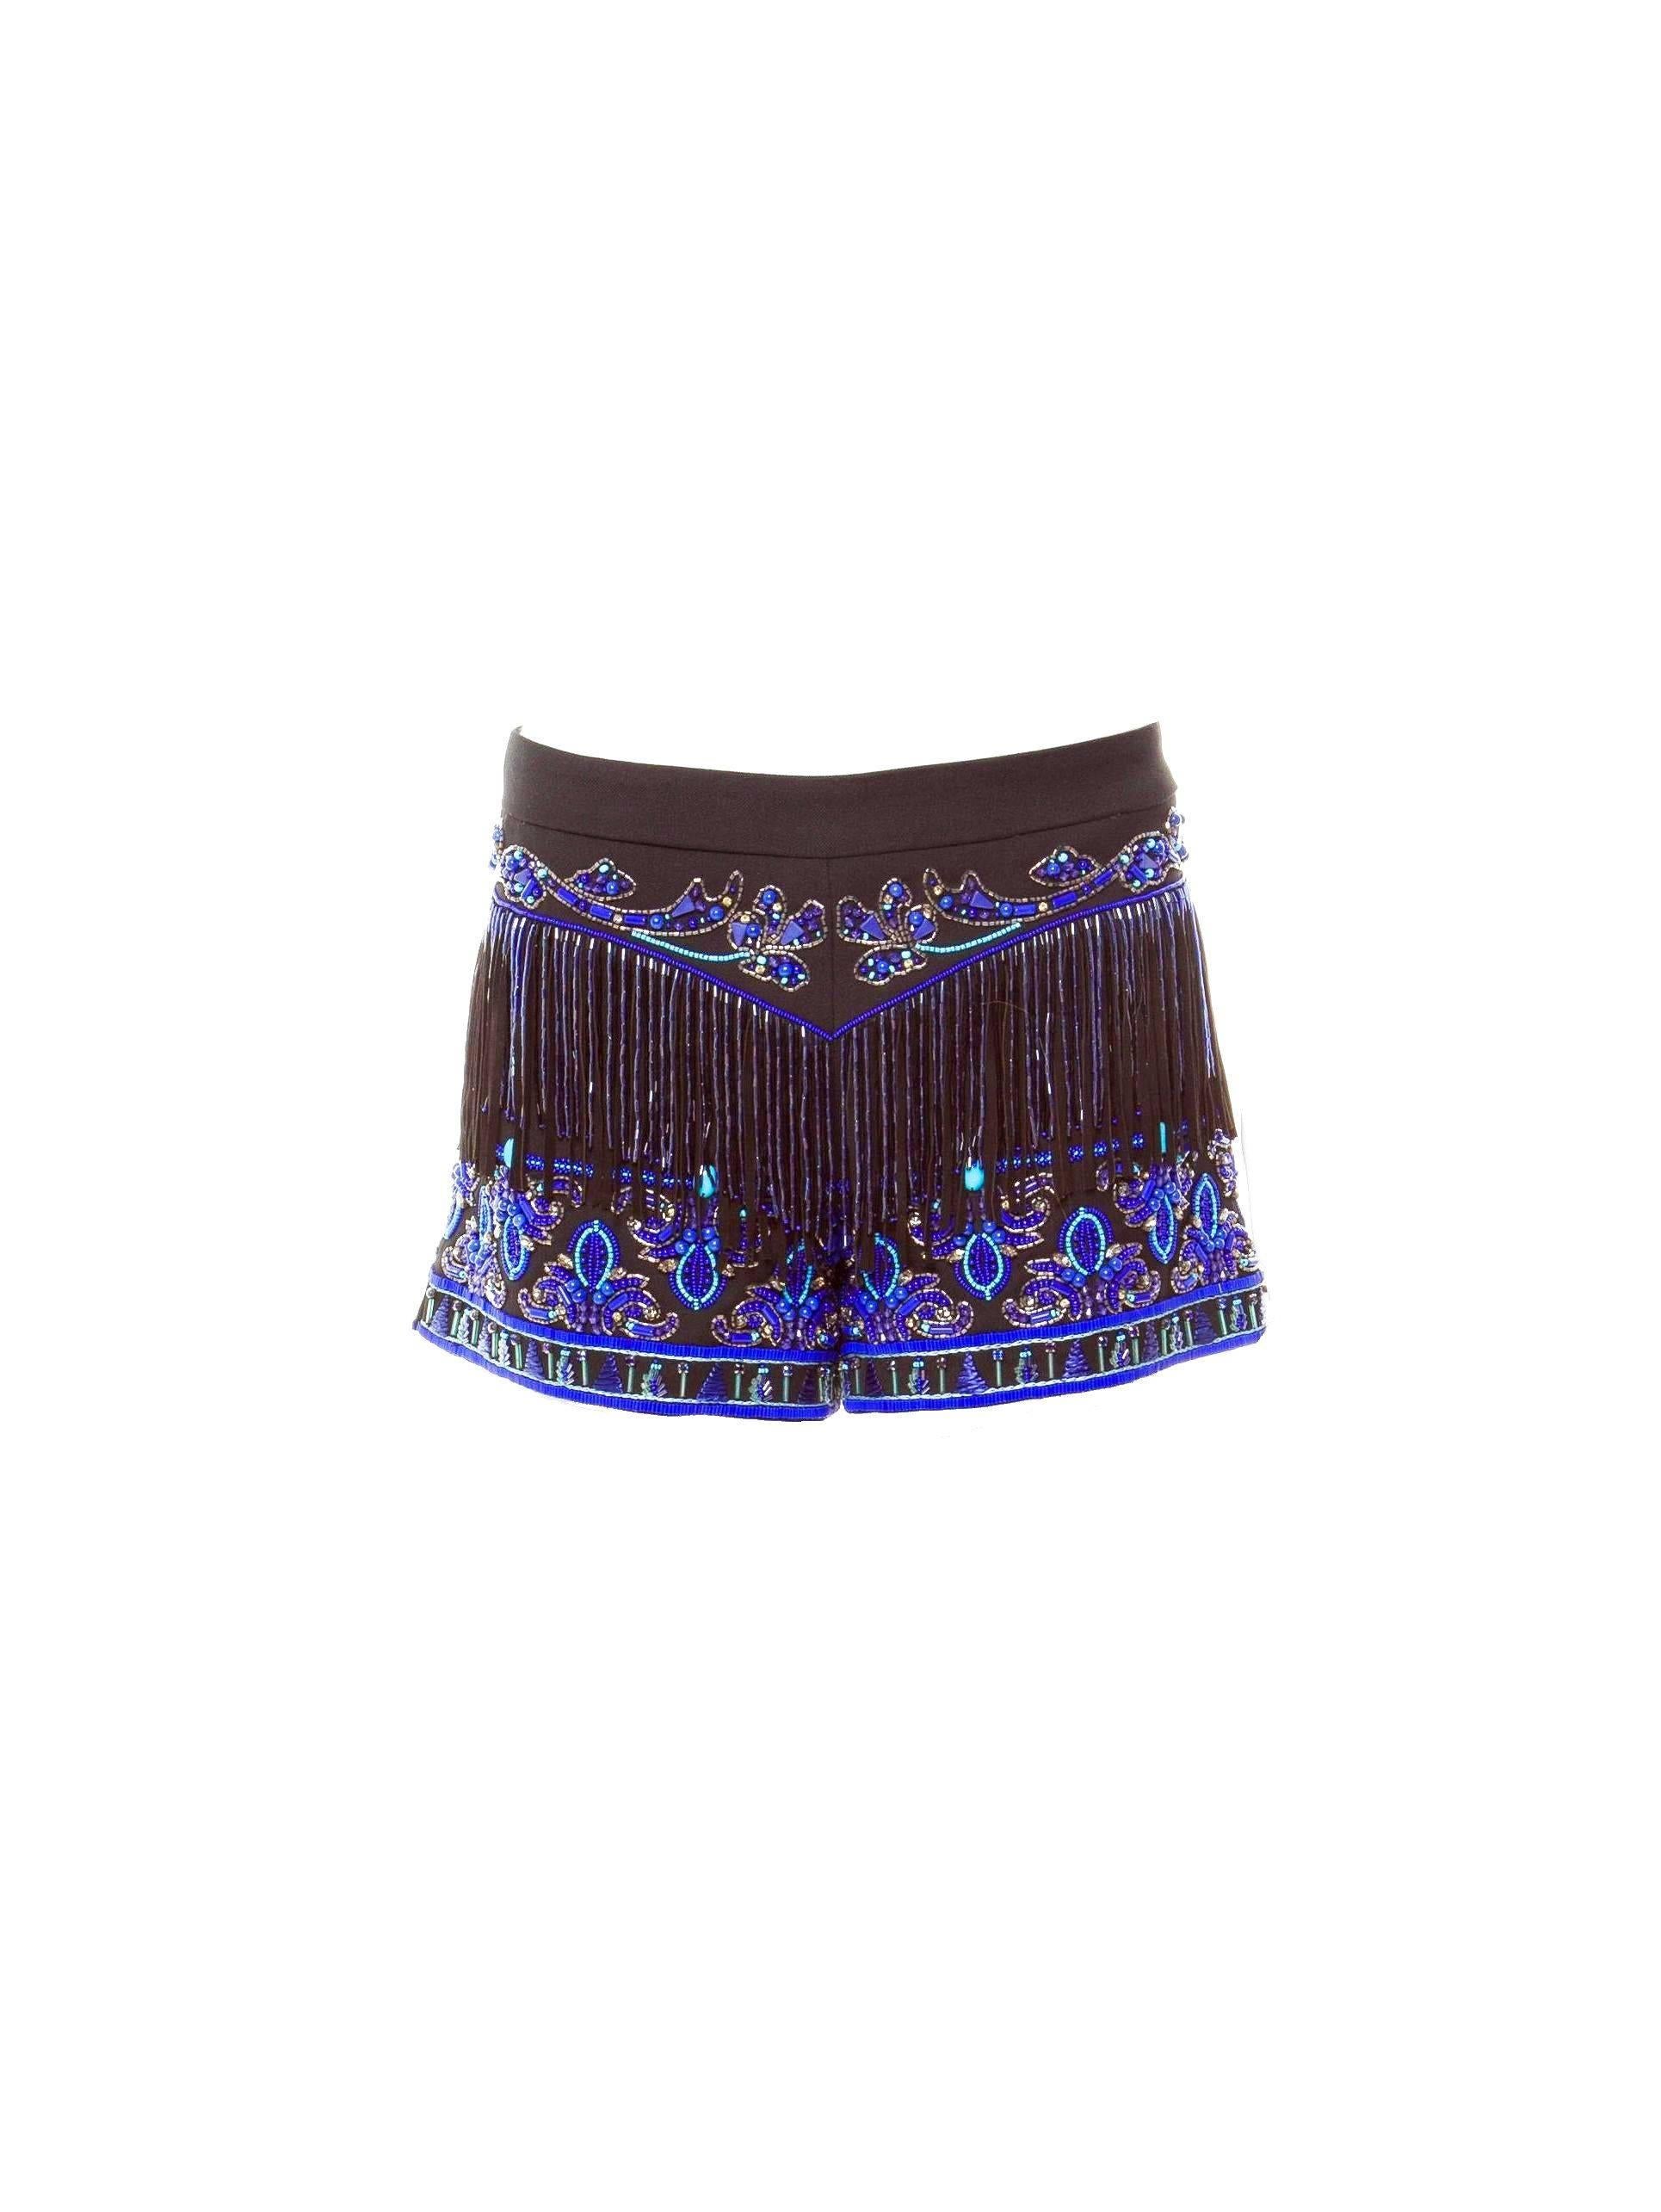 Black Emilio Pucci Embroidered Sequin Pearls Crystals Hot Pants Shorts